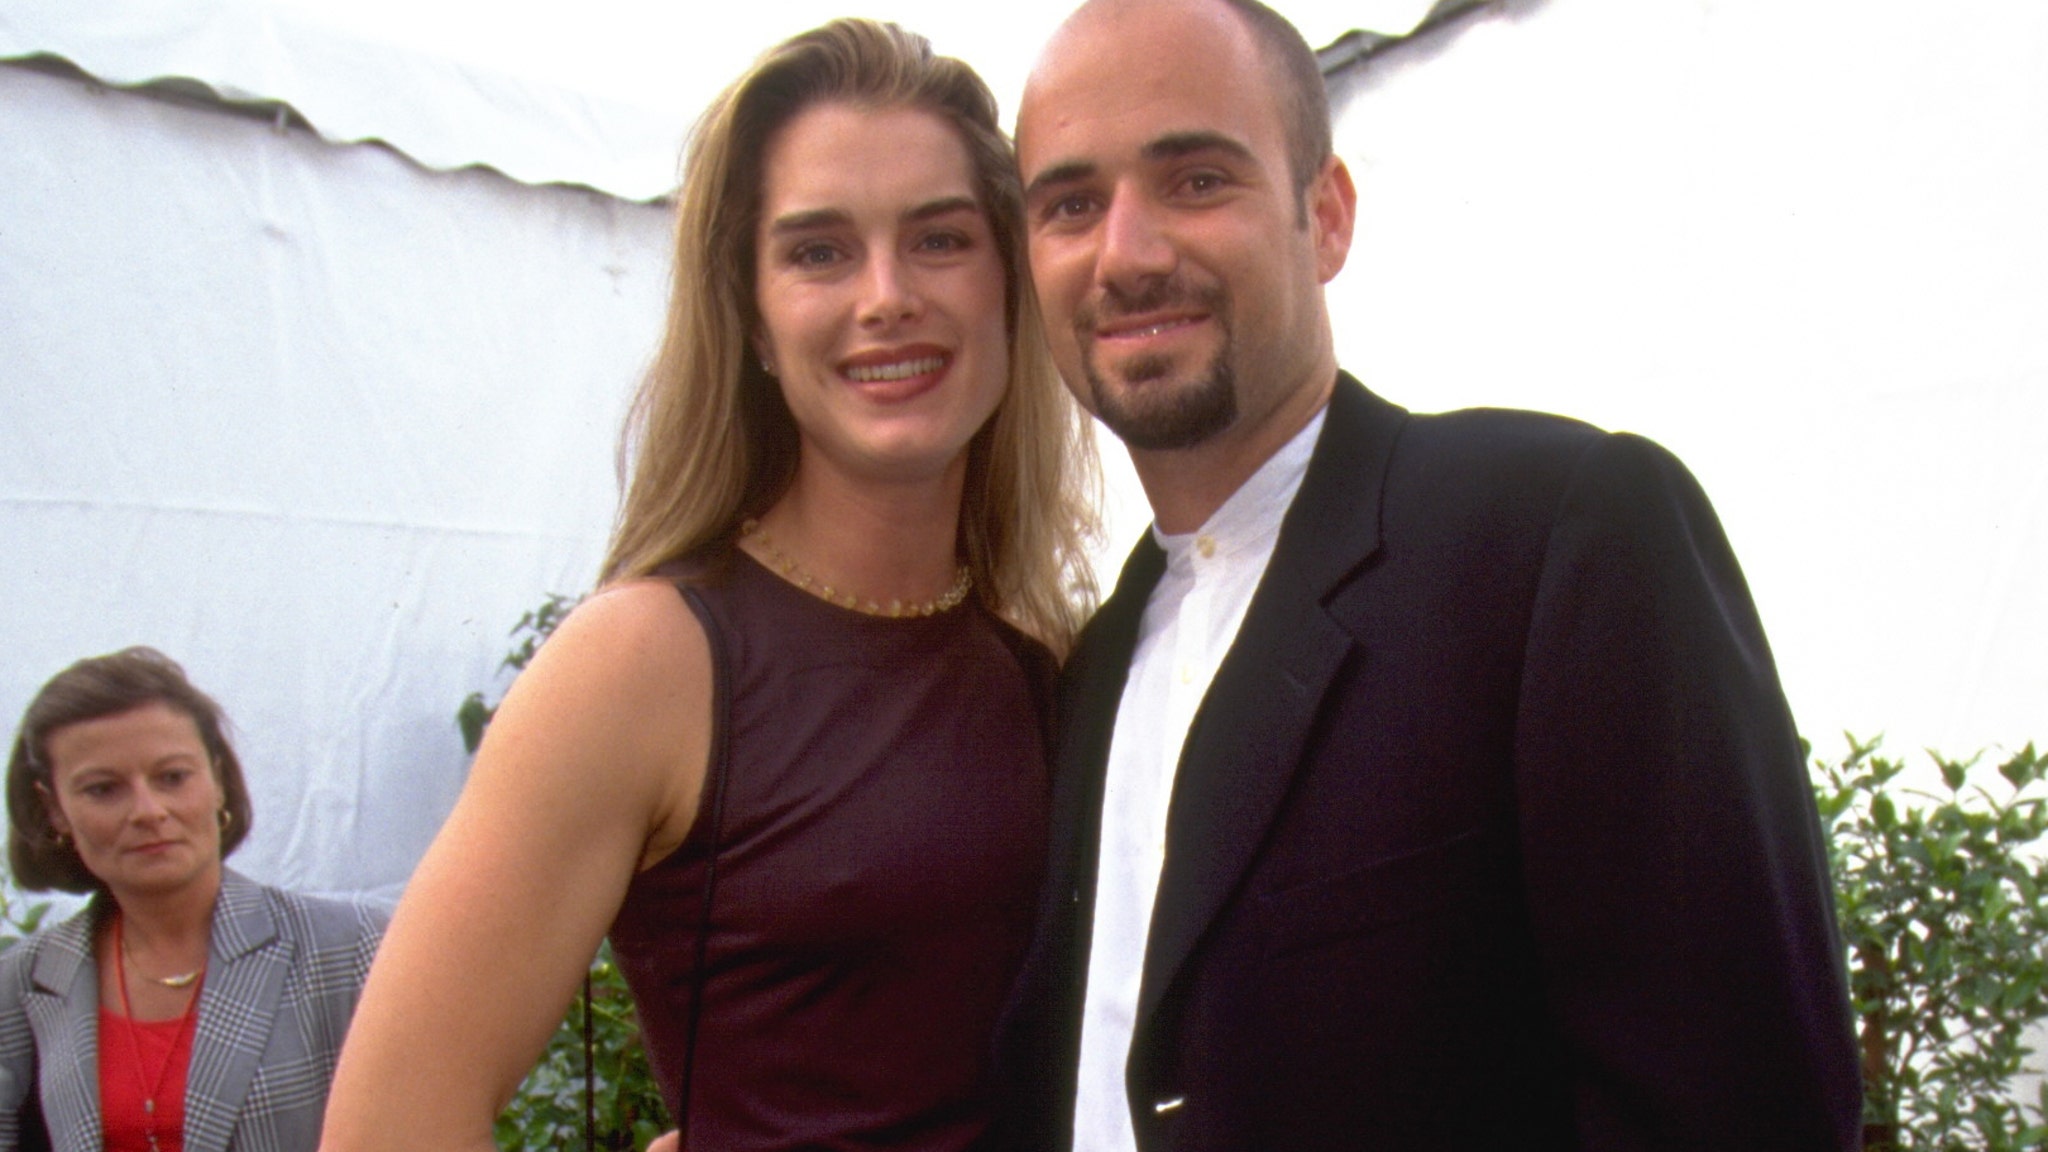 Brooke Shields Says It 'Felt Good to Feel Smaller' During Andre Agassi Romance